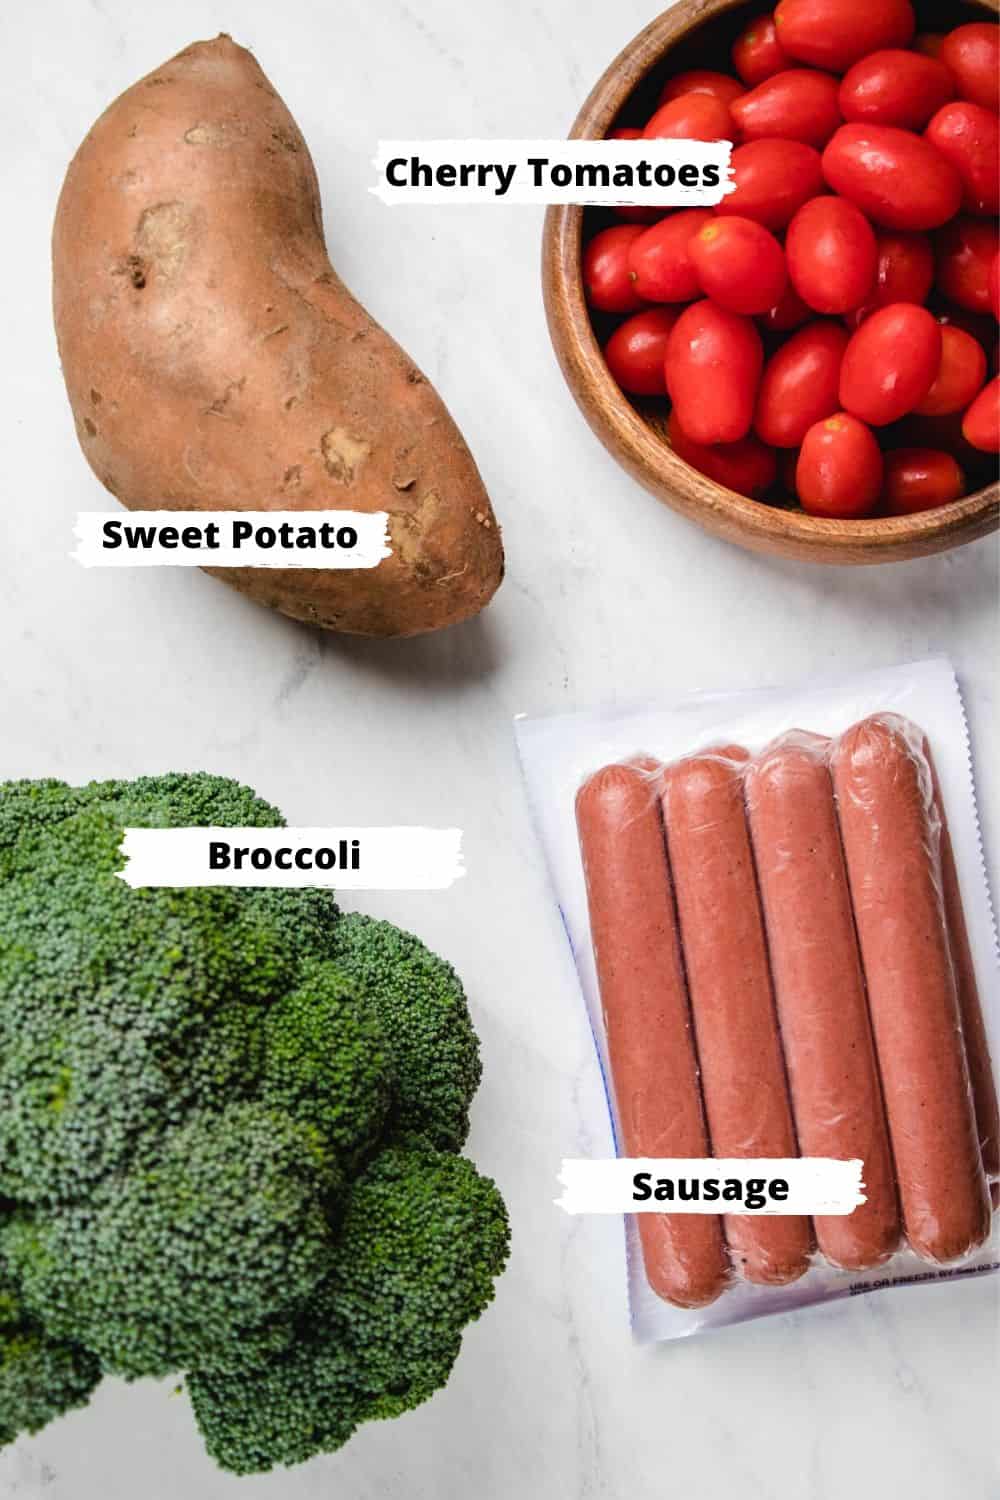 Ingredients for roasted sausage and veggies: sweet potato, cherry tomatoes, broccoli, and sausages.